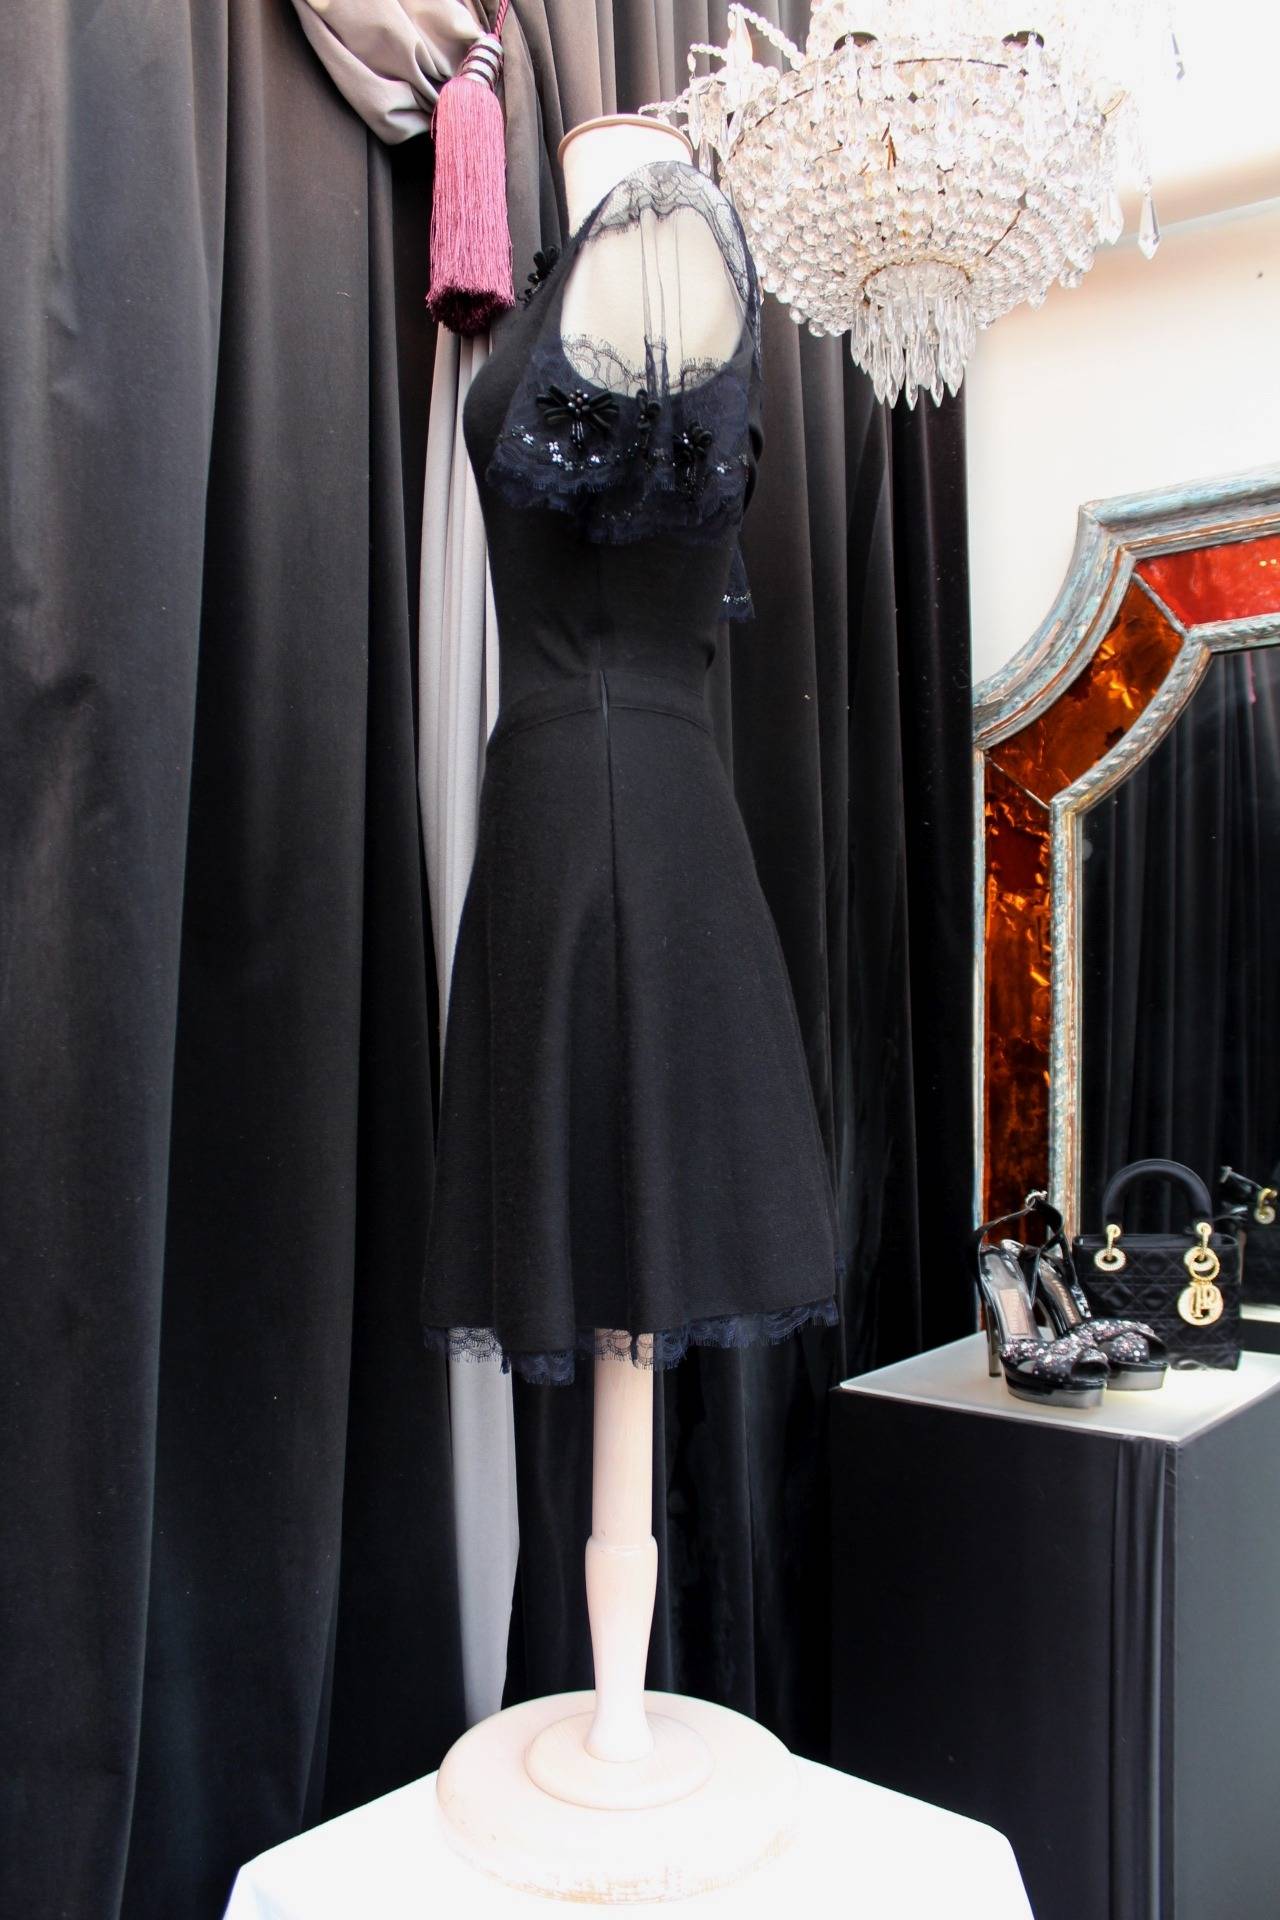 CHRISTIAN DIOR (Made in France) Short sleeves skater dress composed of black woolen cashmere adorned with lace embroidered with bows and beads on the neckline, shoulders and bottom. 

The dress features a waistband and a zip on the left side.